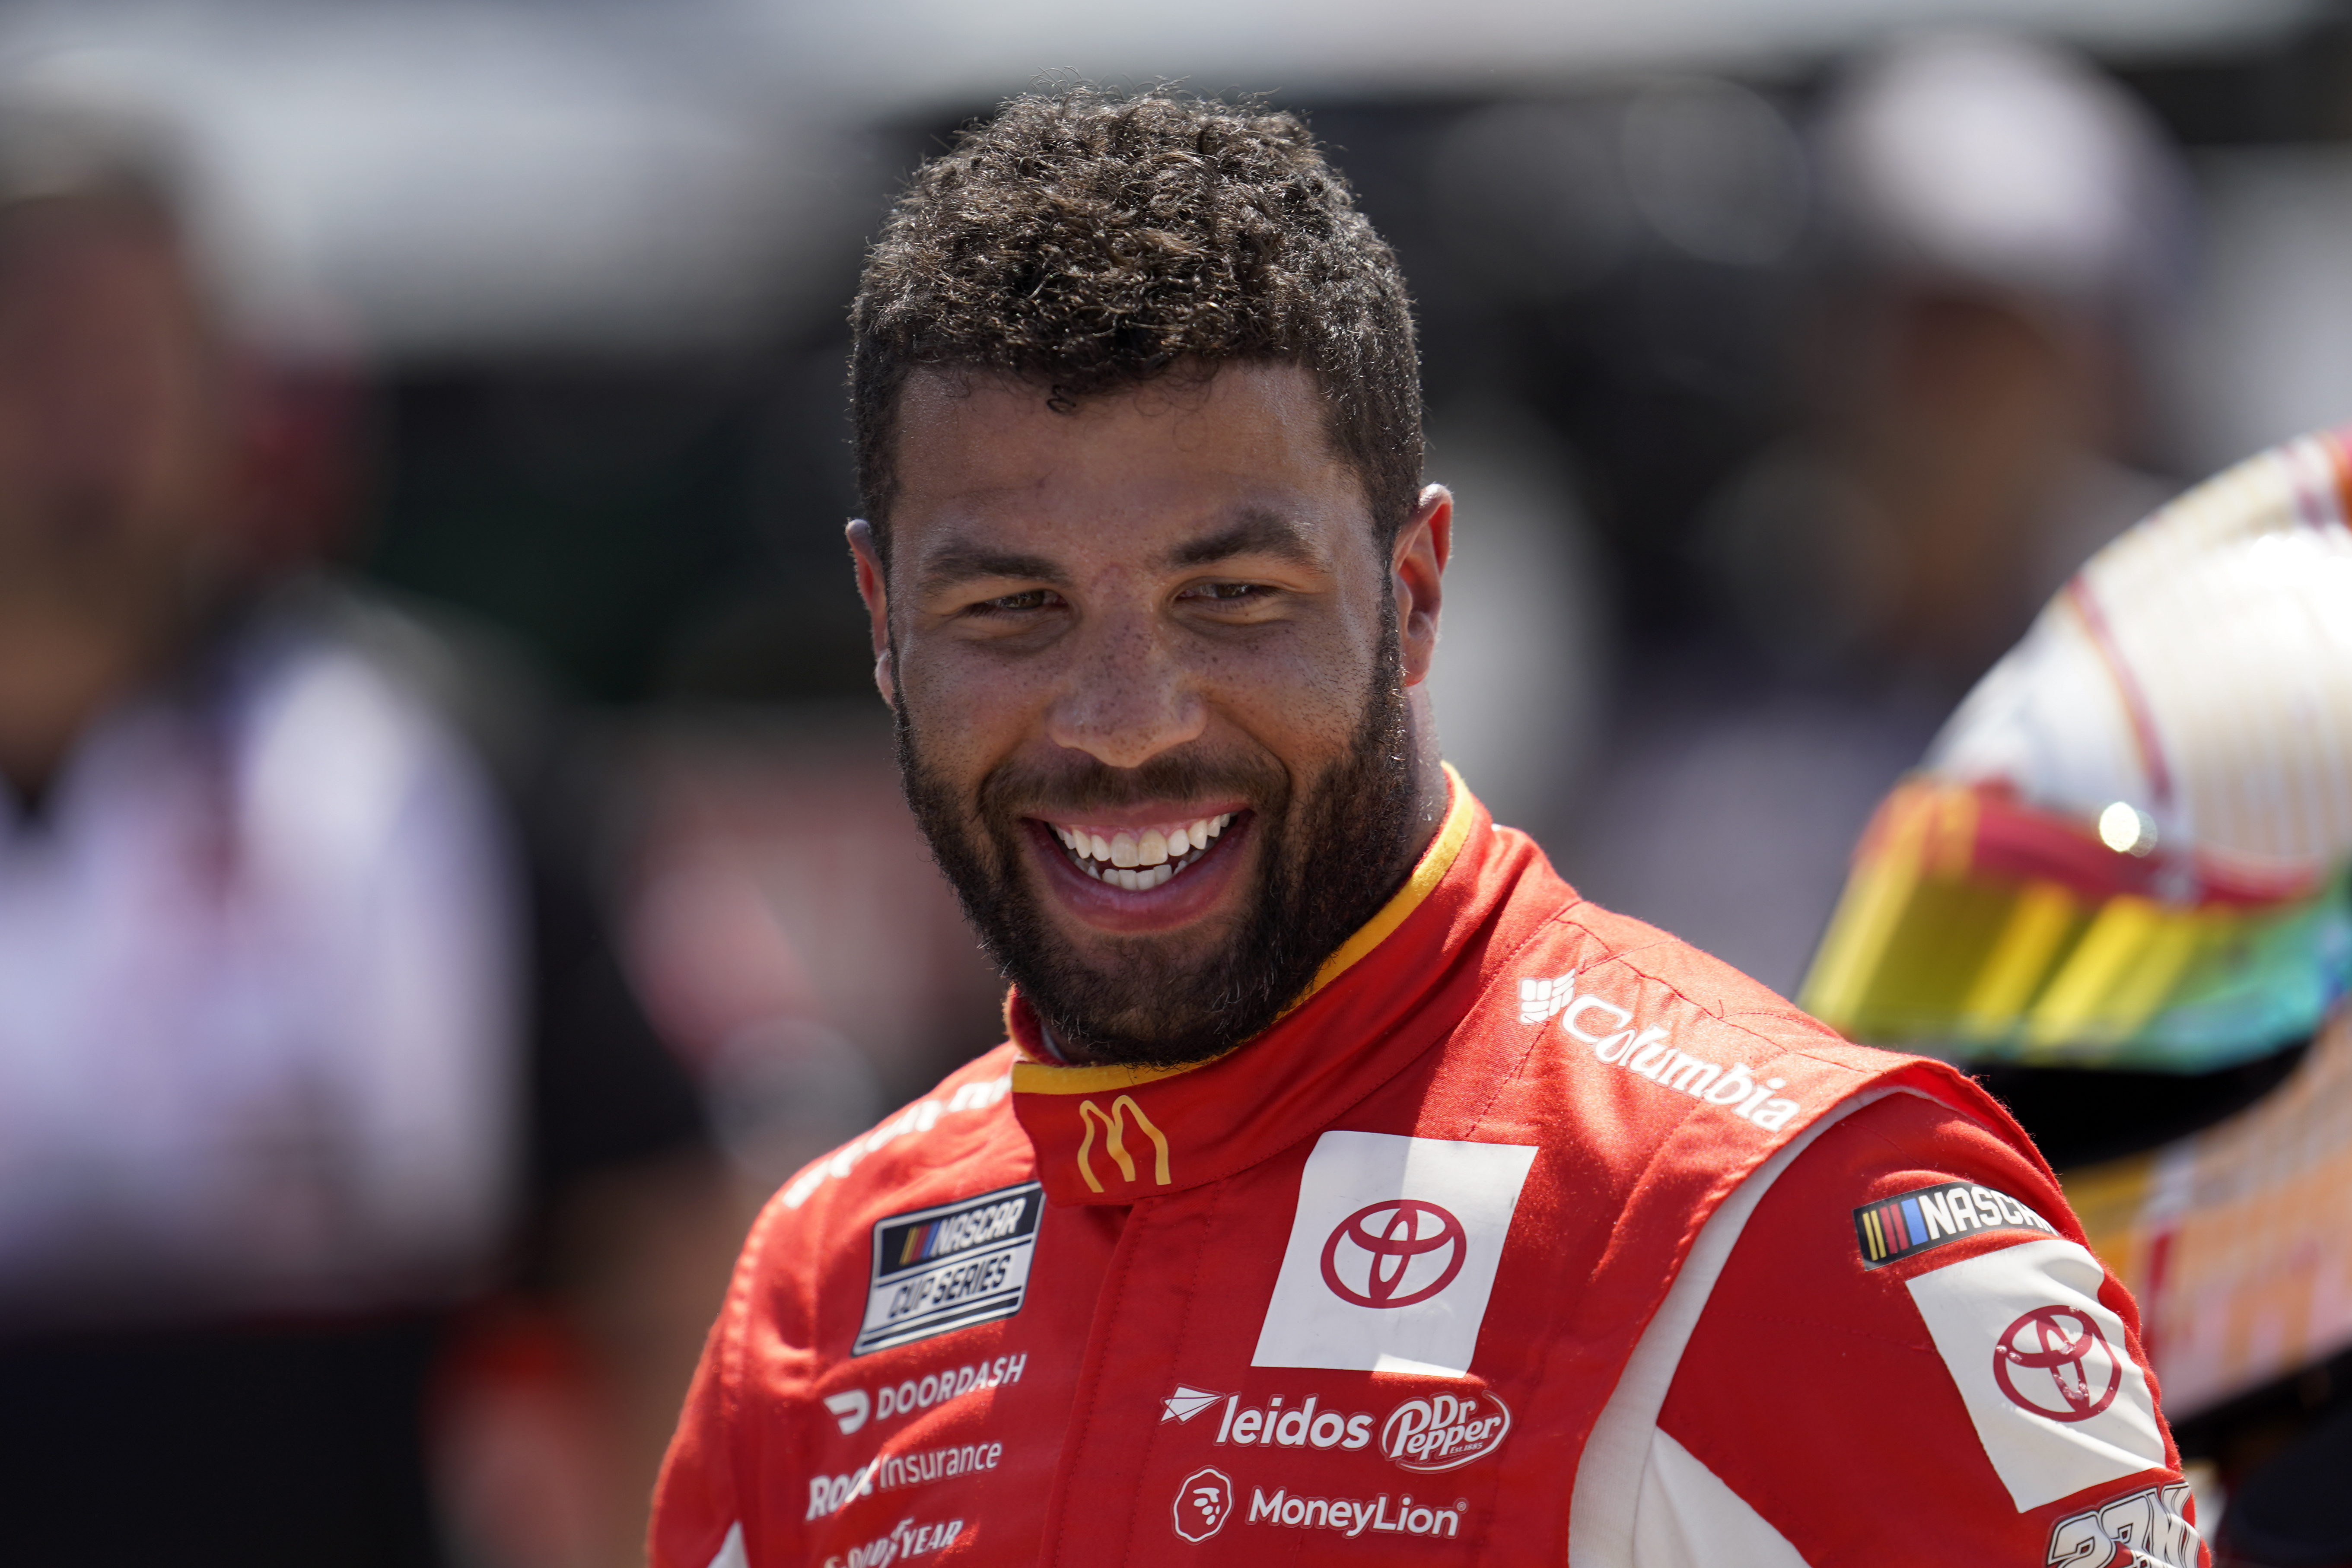 How to Watch FireKeepers Casino 400 at Michigan Speedway (8/7/22) Free live stream, time, channel, NASCAR Cup Series race favorites